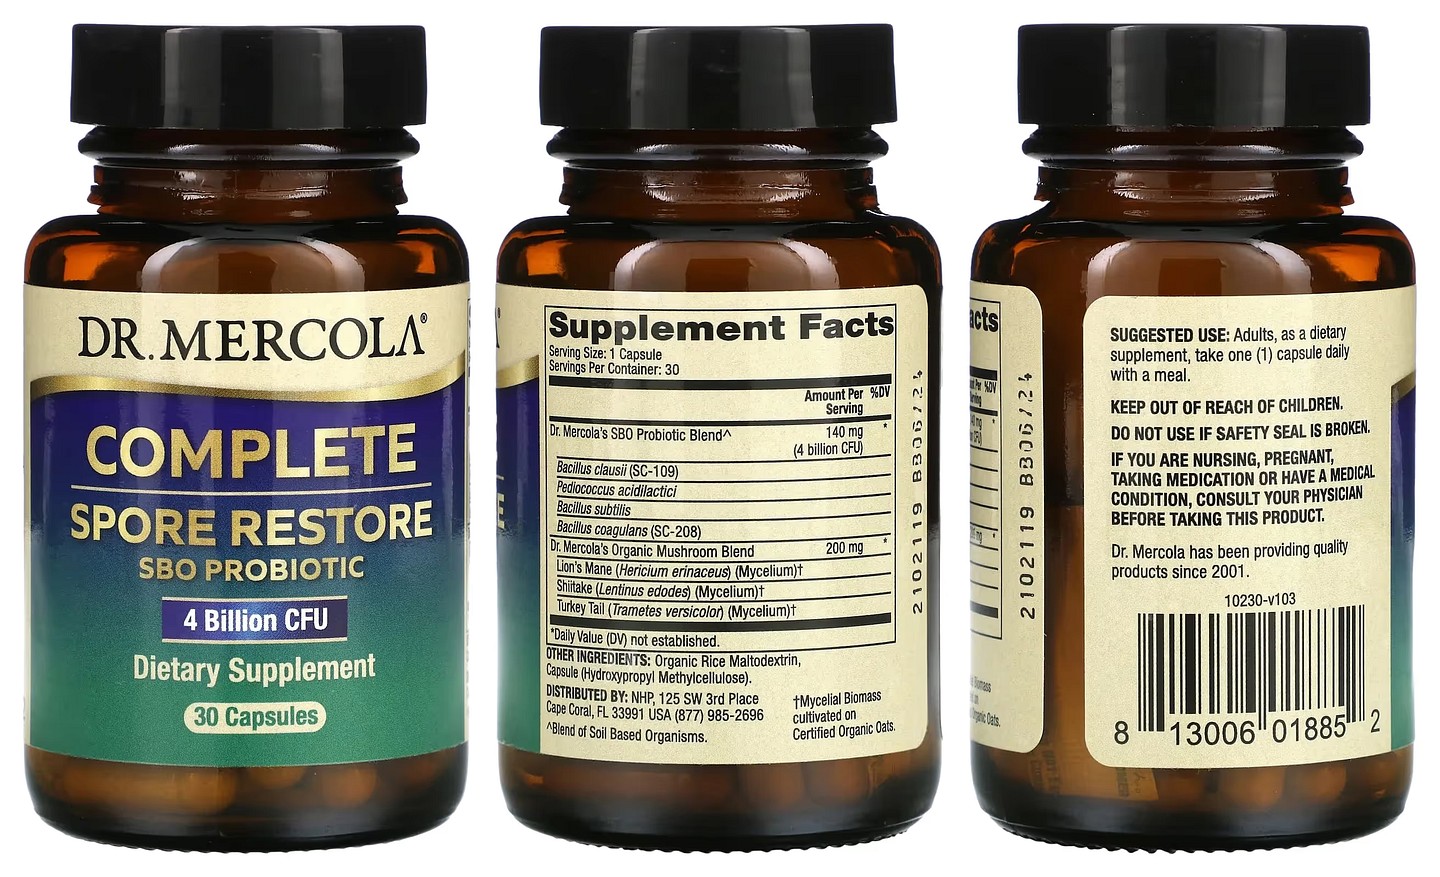 Dr. Mercola, Complete Spore Restore packaging